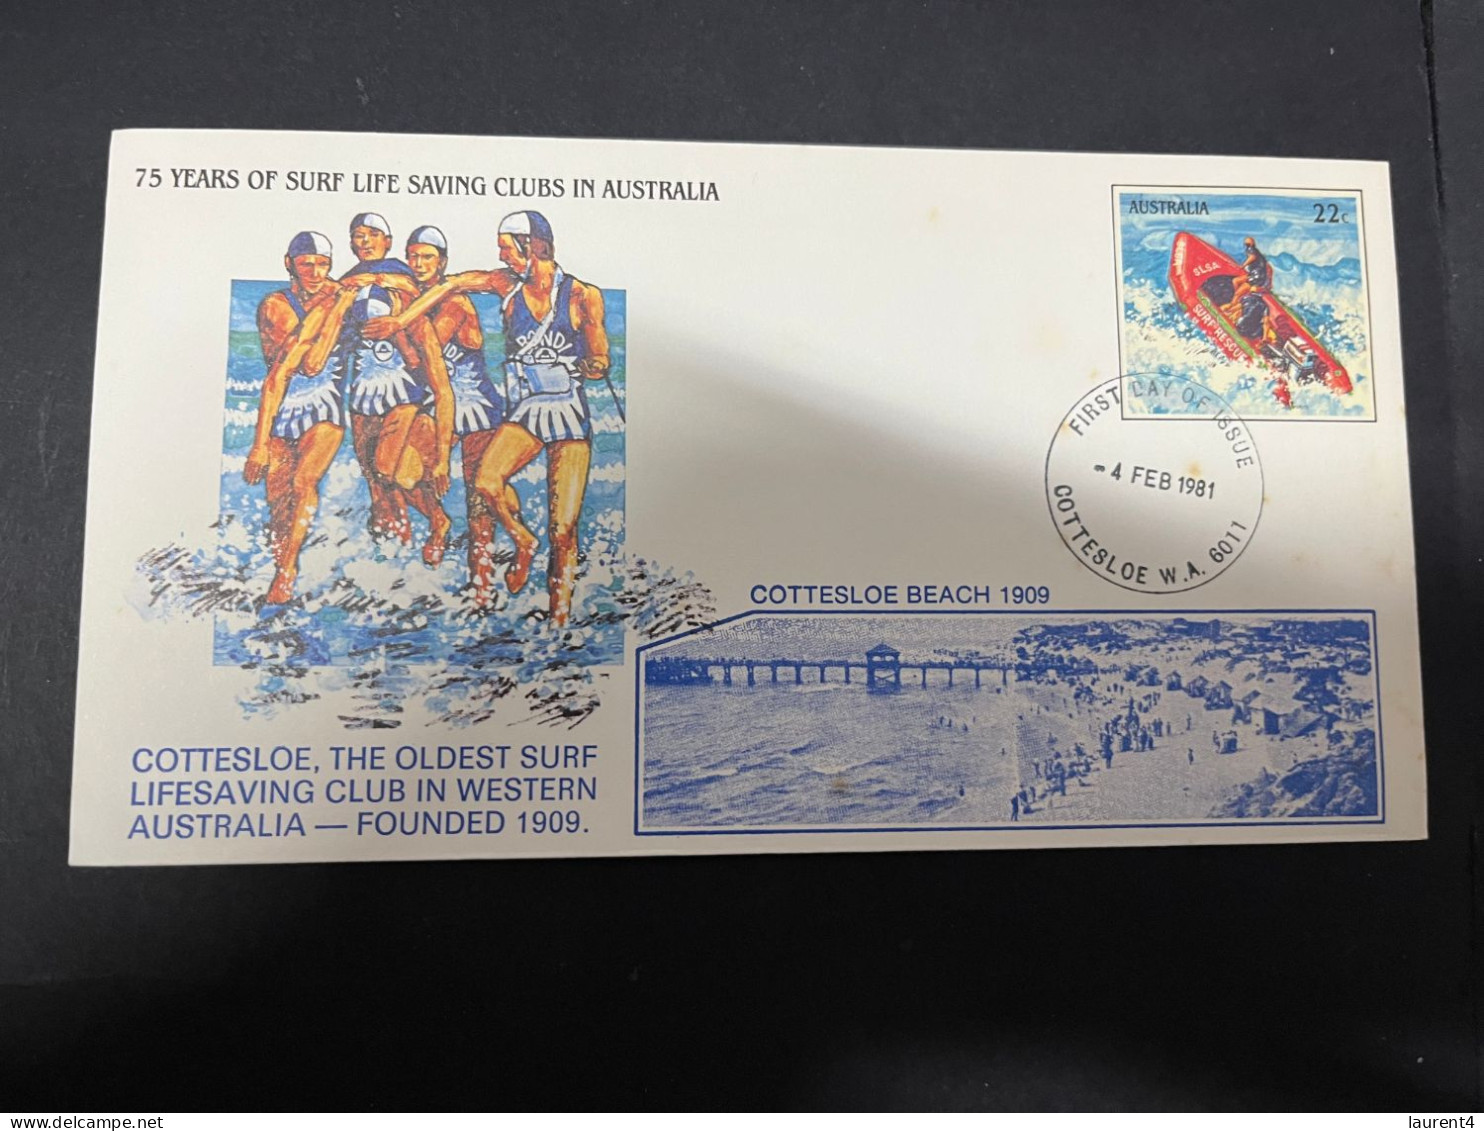 12-4-2024 (1 Z 44) Australia FDC - 75th Anniversary Of Life Surf Clubs In Austraia (2 Covers) 1981 - Premiers Jours (FDC)